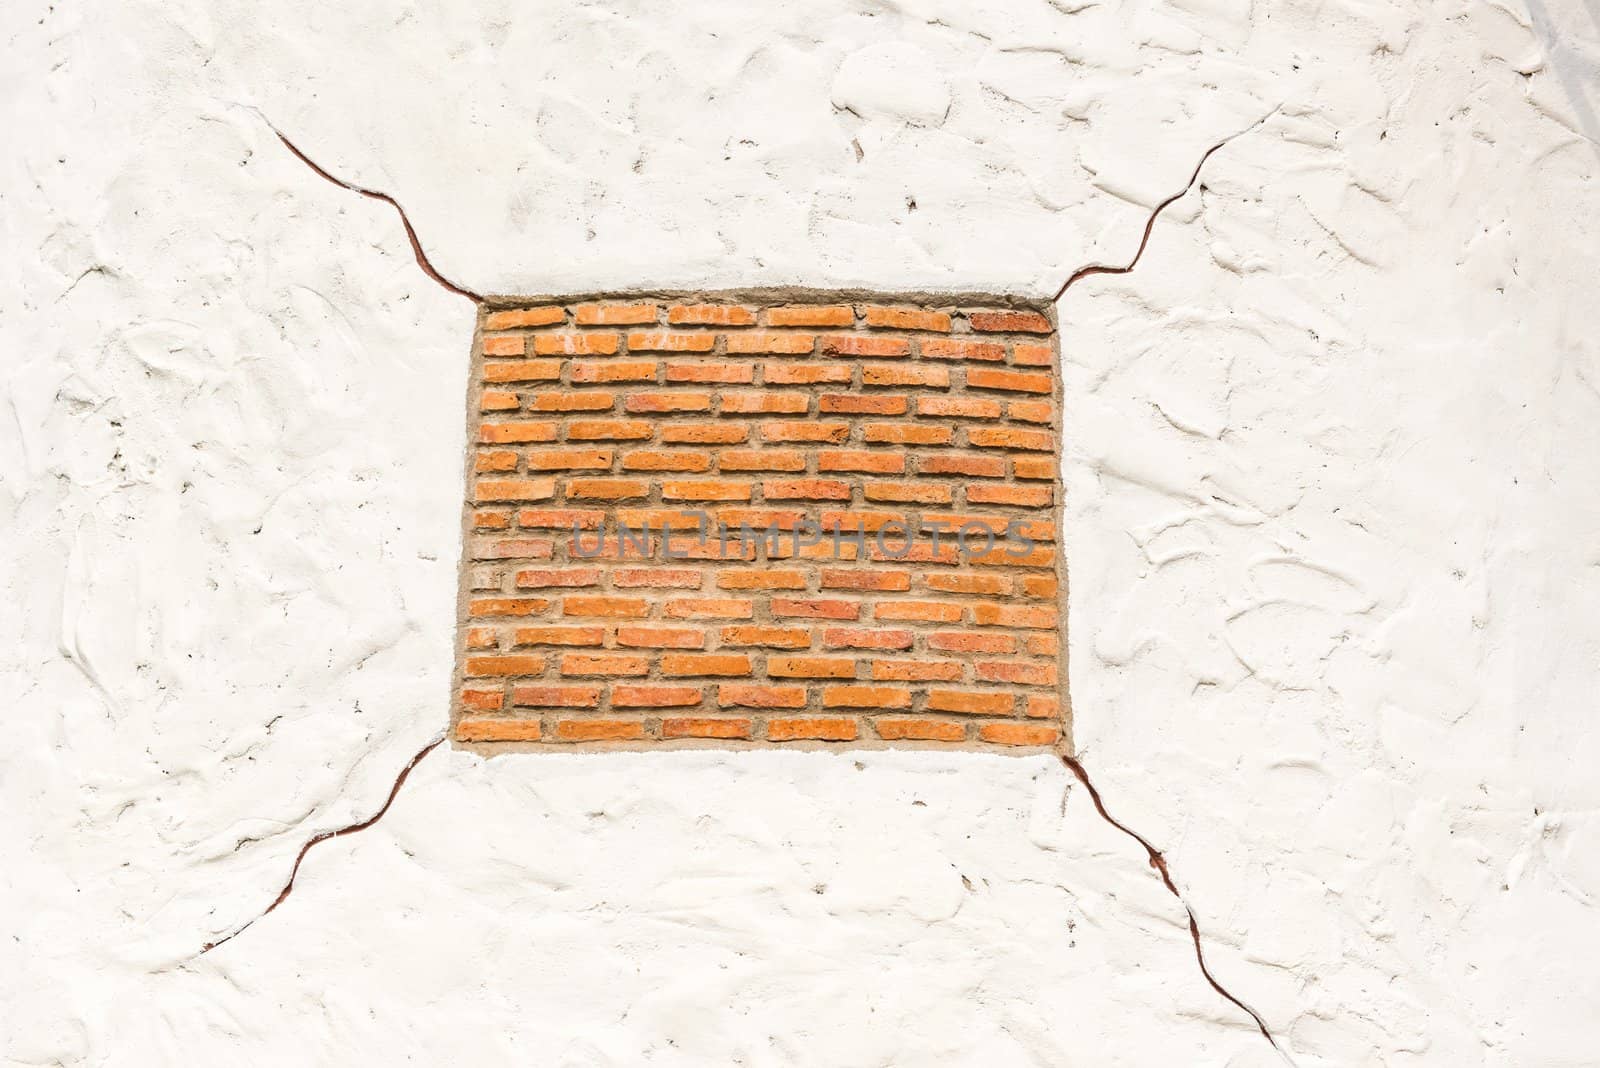 Red square shape brick on white background with cracks, taken outdoor.